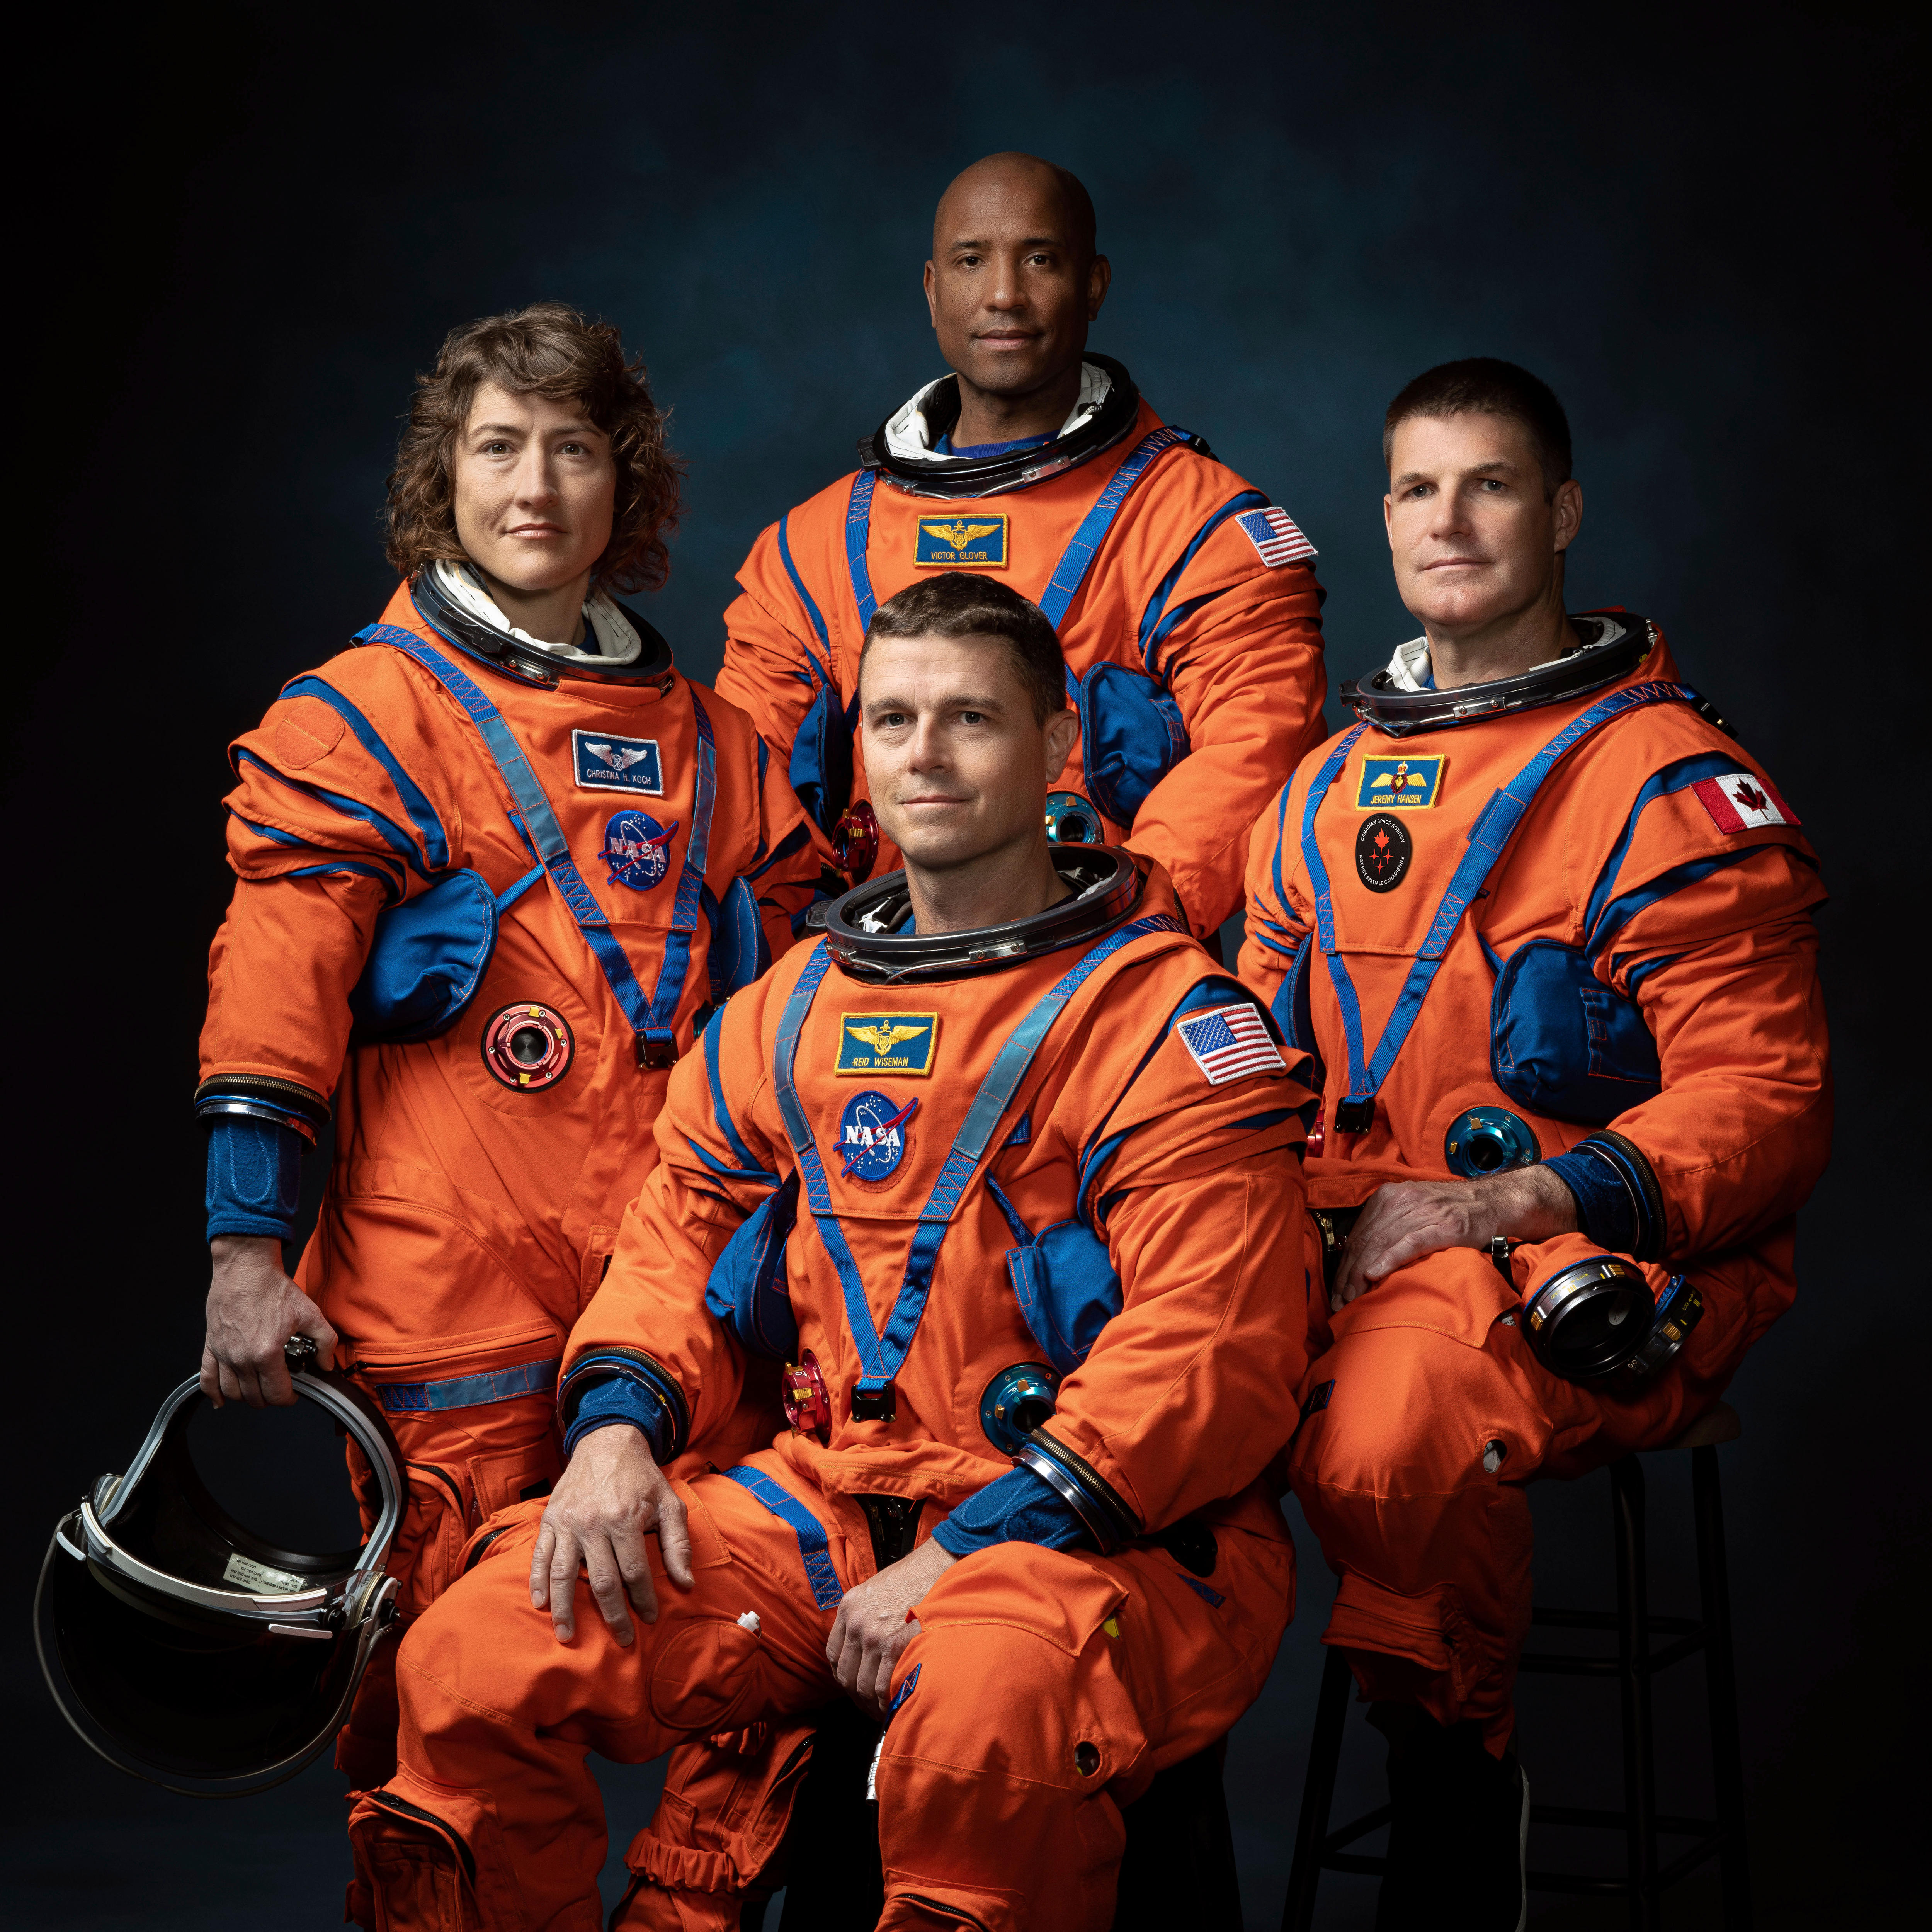 The four astronauts pose for a photo wearing orange suits. 